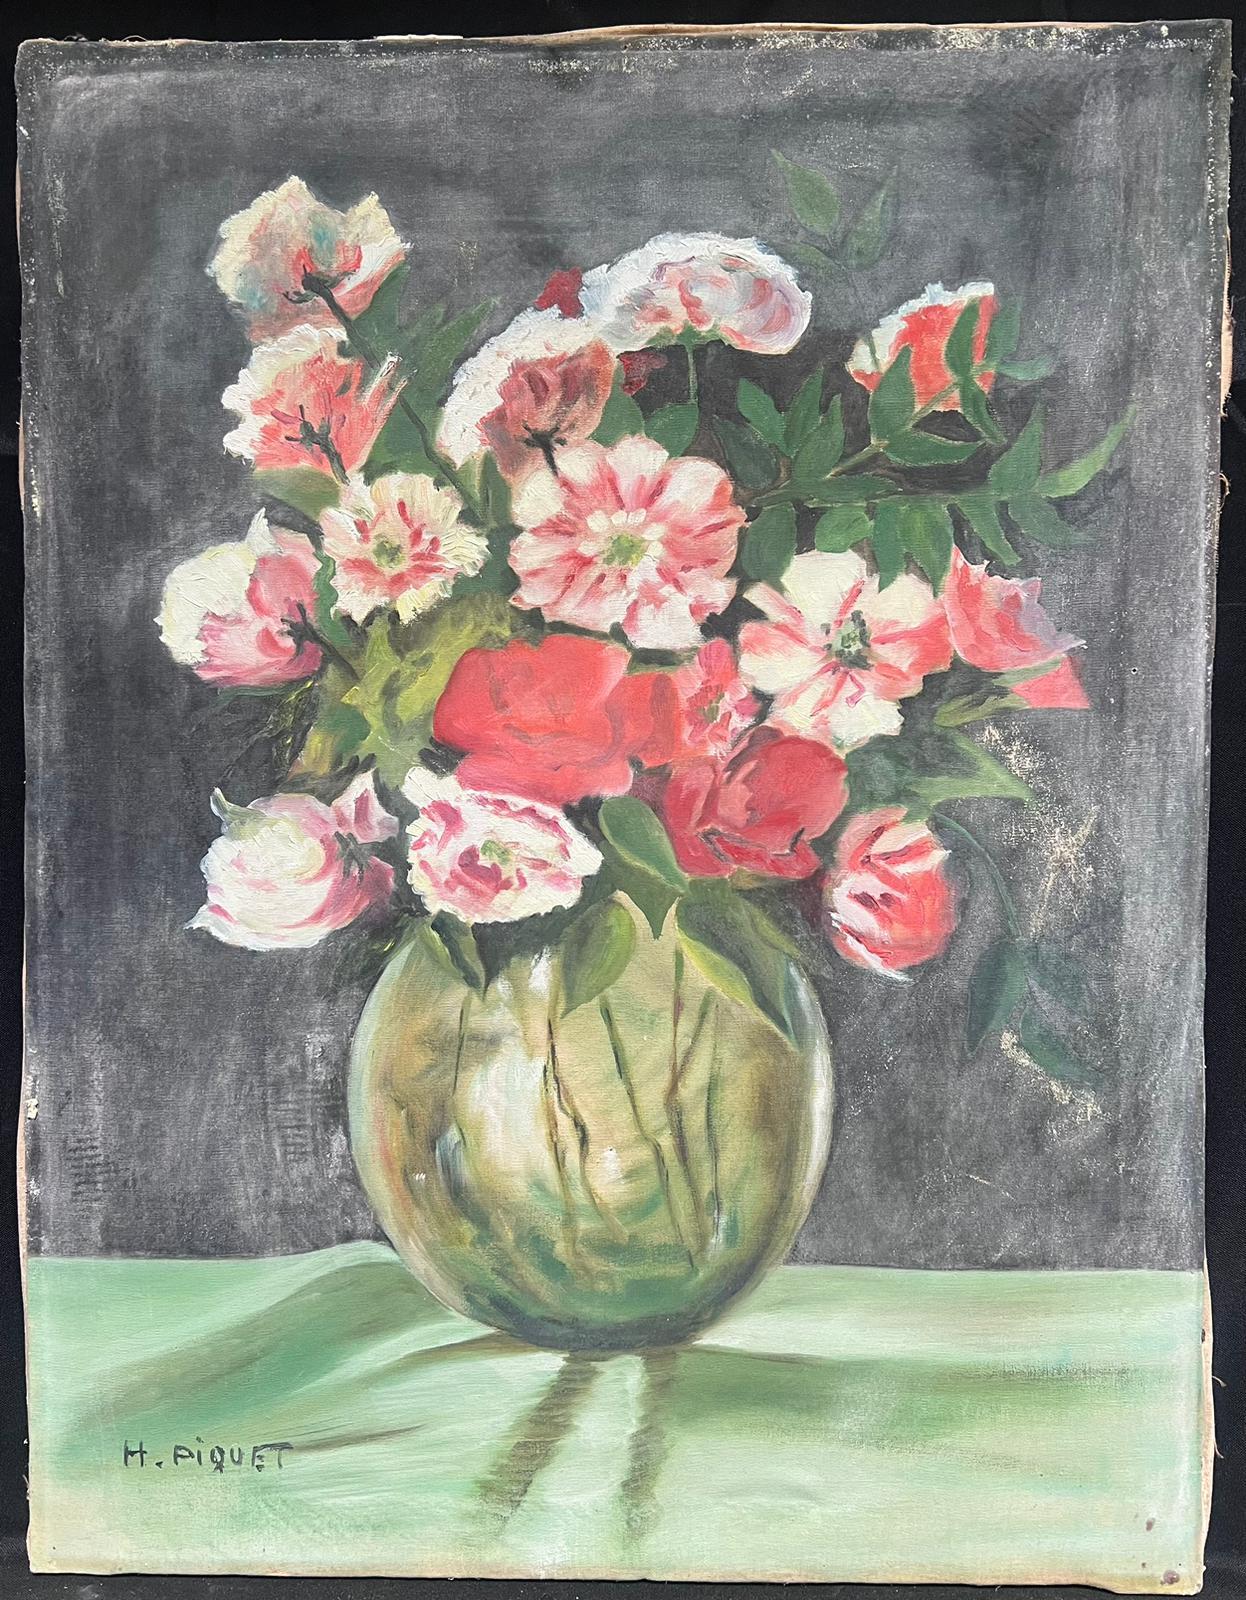 1950s French Signed Oil Painting Shabby Chic Vintage Flowers in Vase Still Life - Gray Interior Painting by French Mid 20th Century